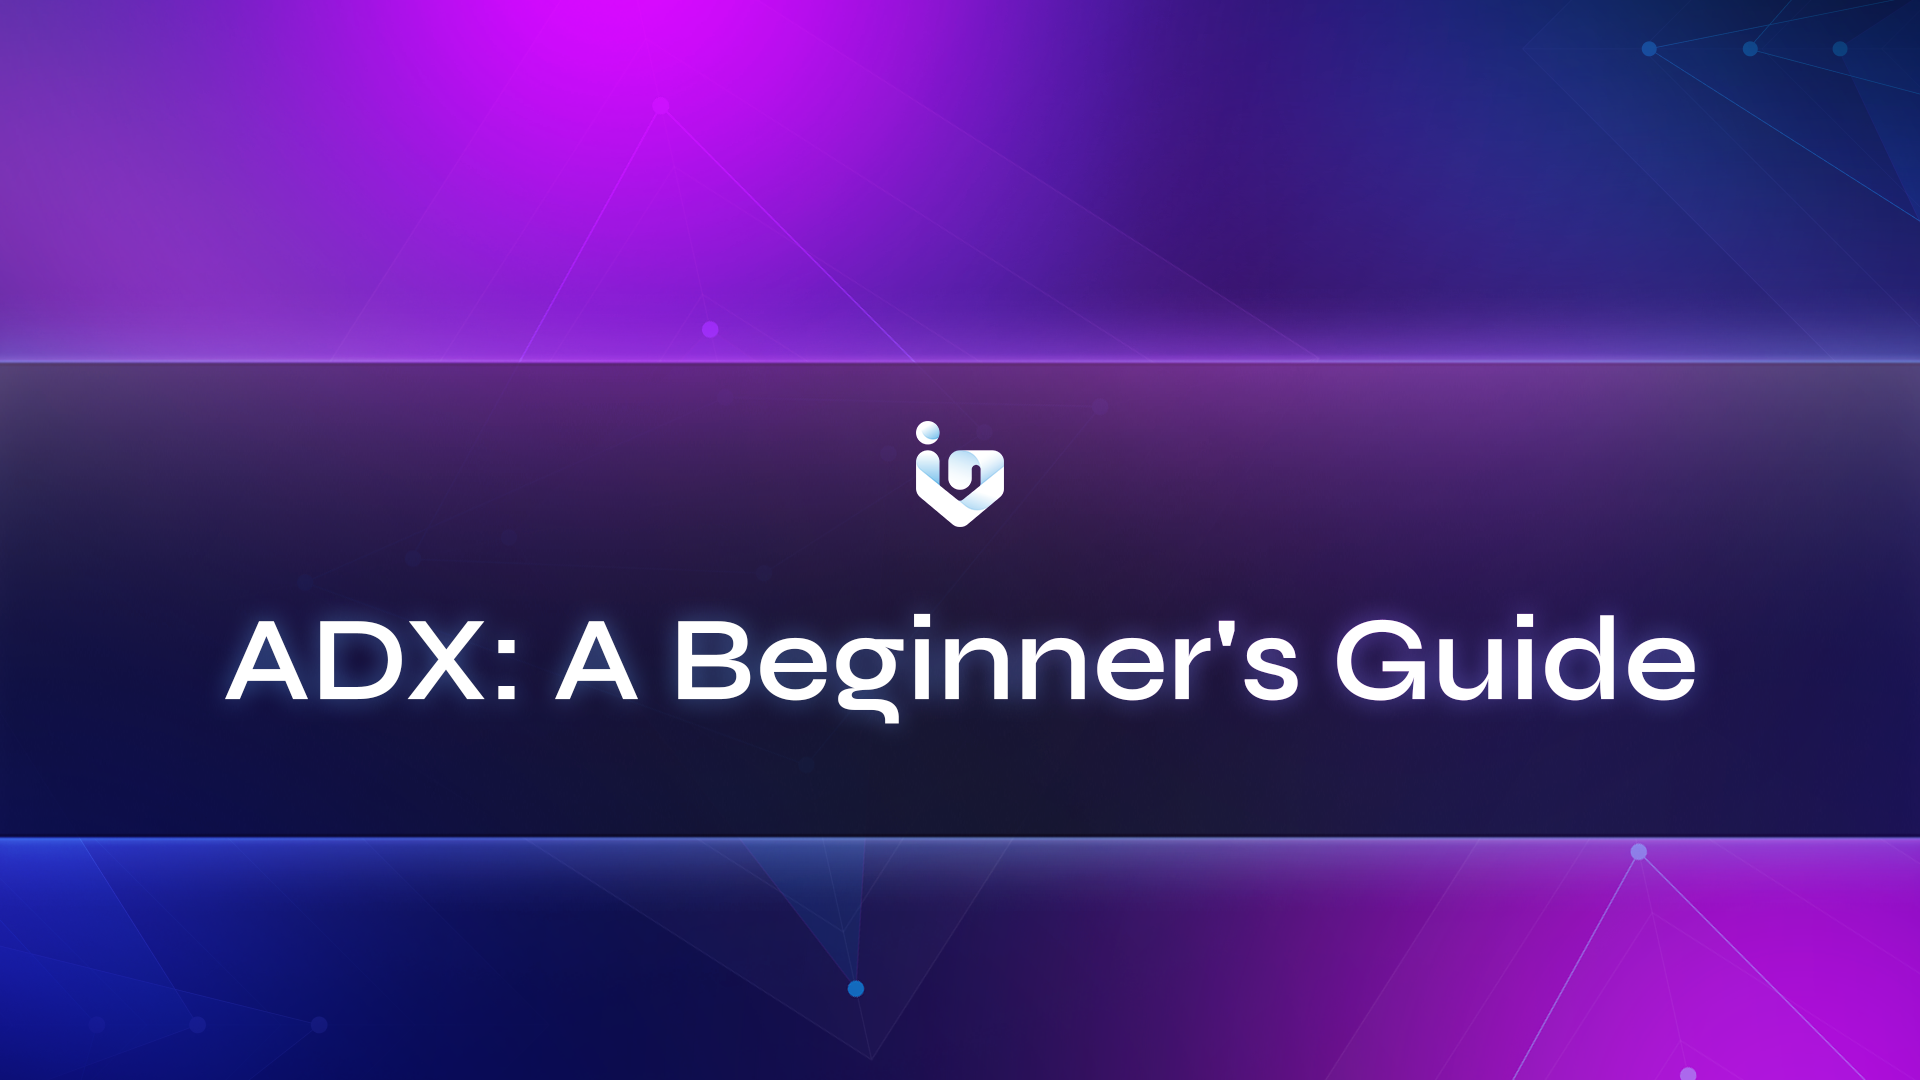 ADX: A Beginner's Guide